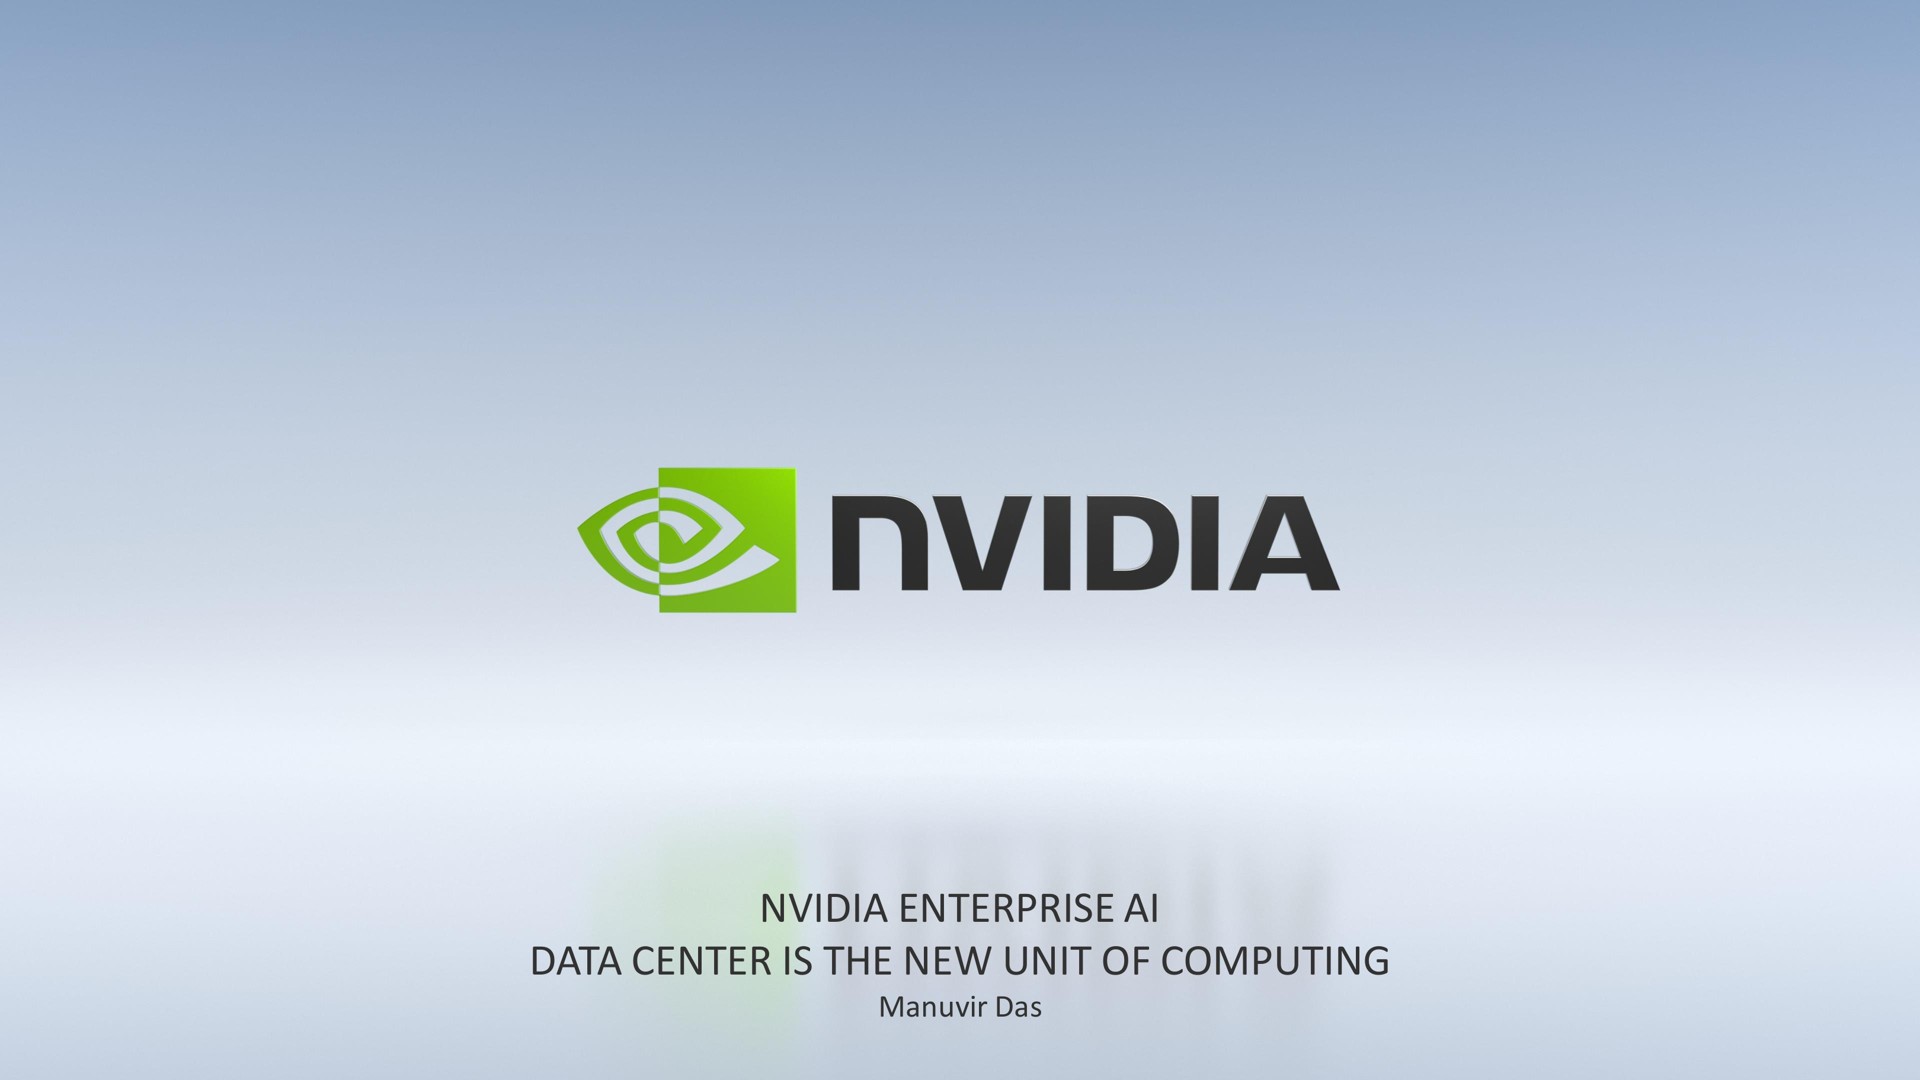 enterprise data center is the new unit of computing | NVIDIA